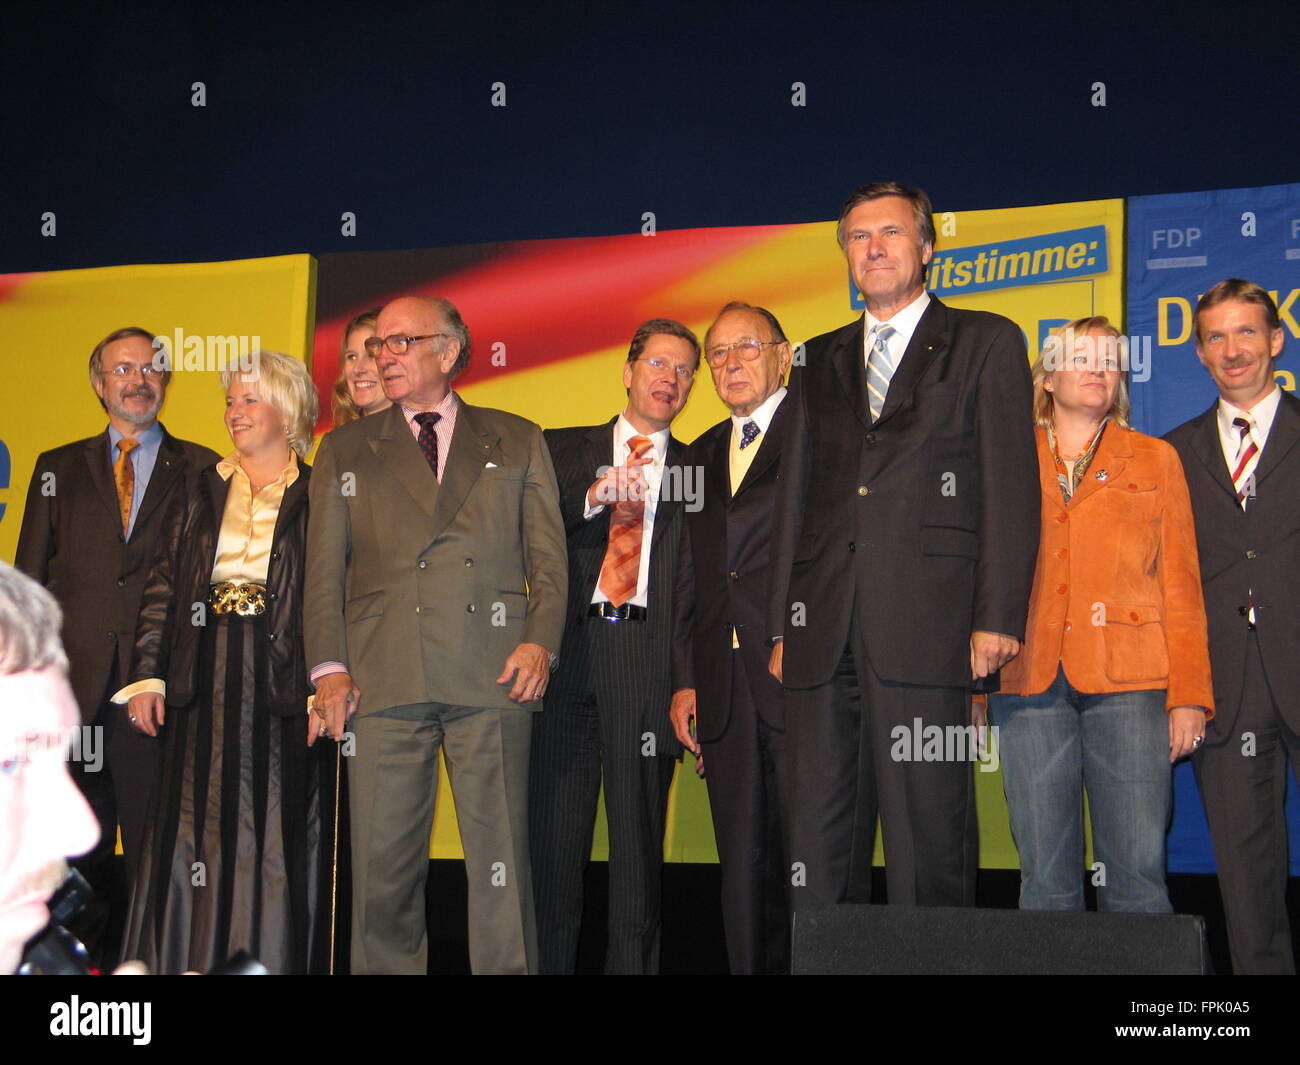 Guido Westerwelle at a FDP election party, with Hans-Dietrich Genscher in Bonn, Germany Stock Photo